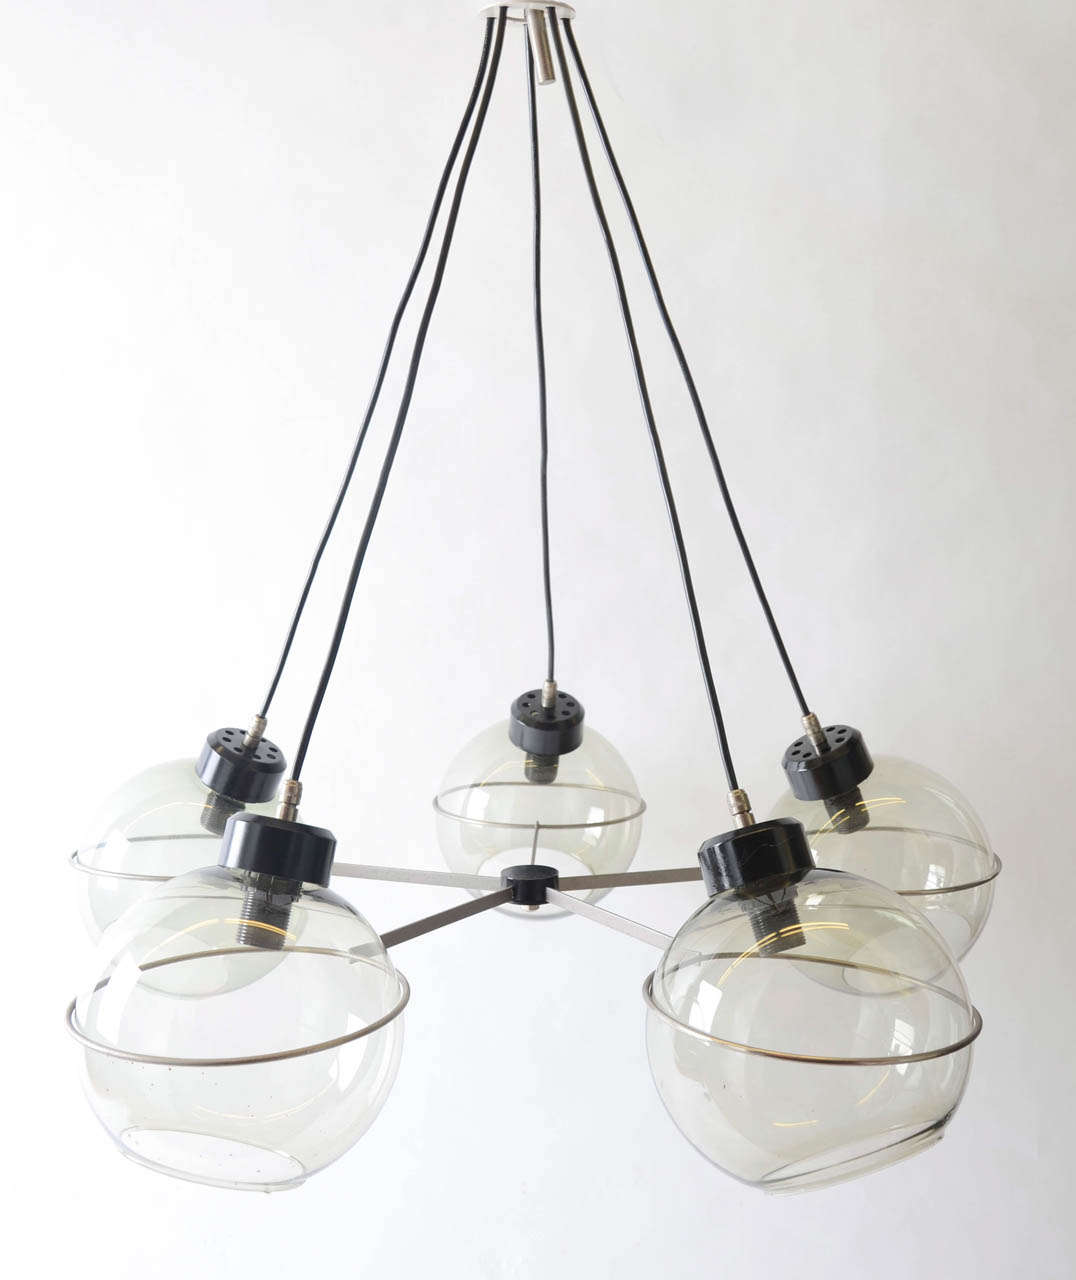 A fine, rare example from the Italian lighting designer Vico Magistretti.

Five globe suspension from the 1960s.
In excellent condition with all the original (tinted) glass globes.